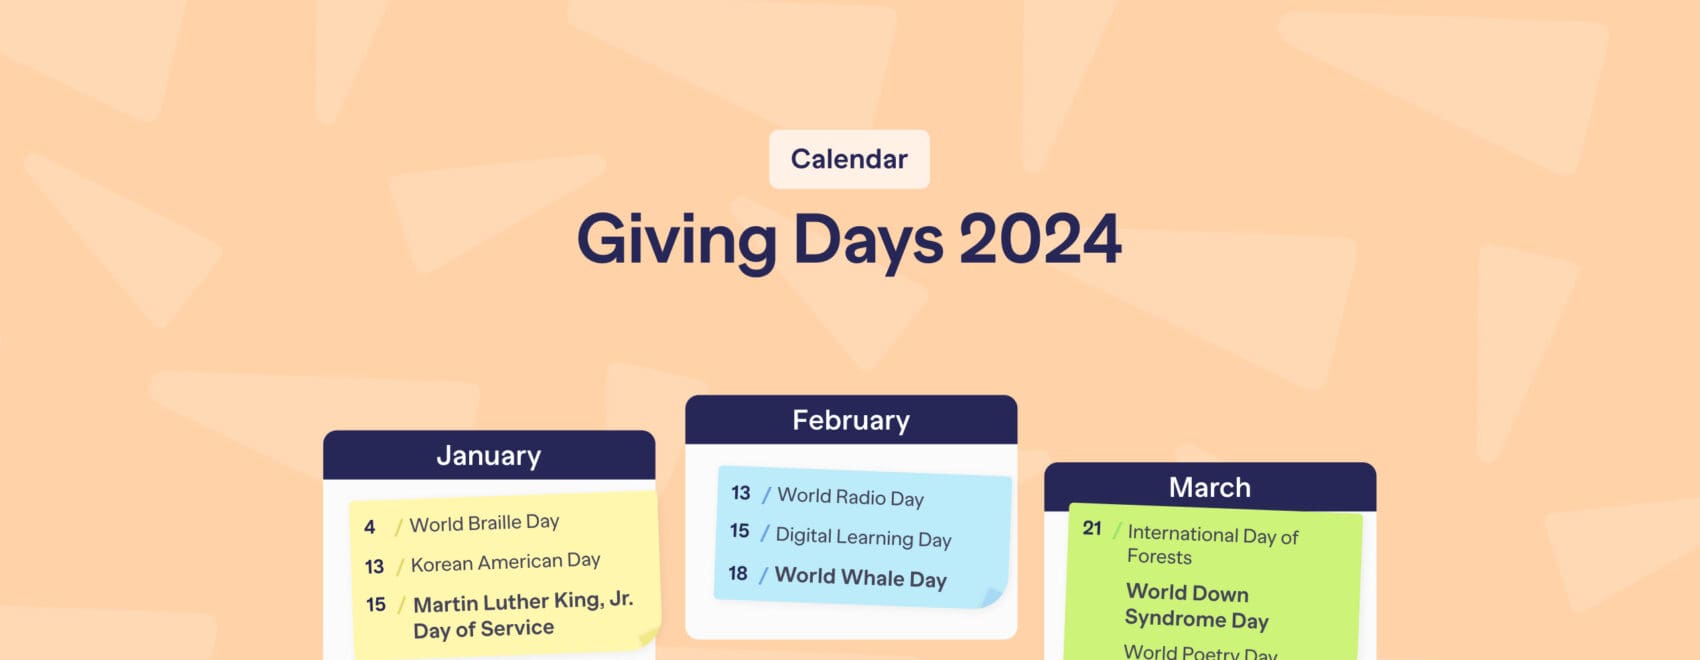 Giving Days 2024